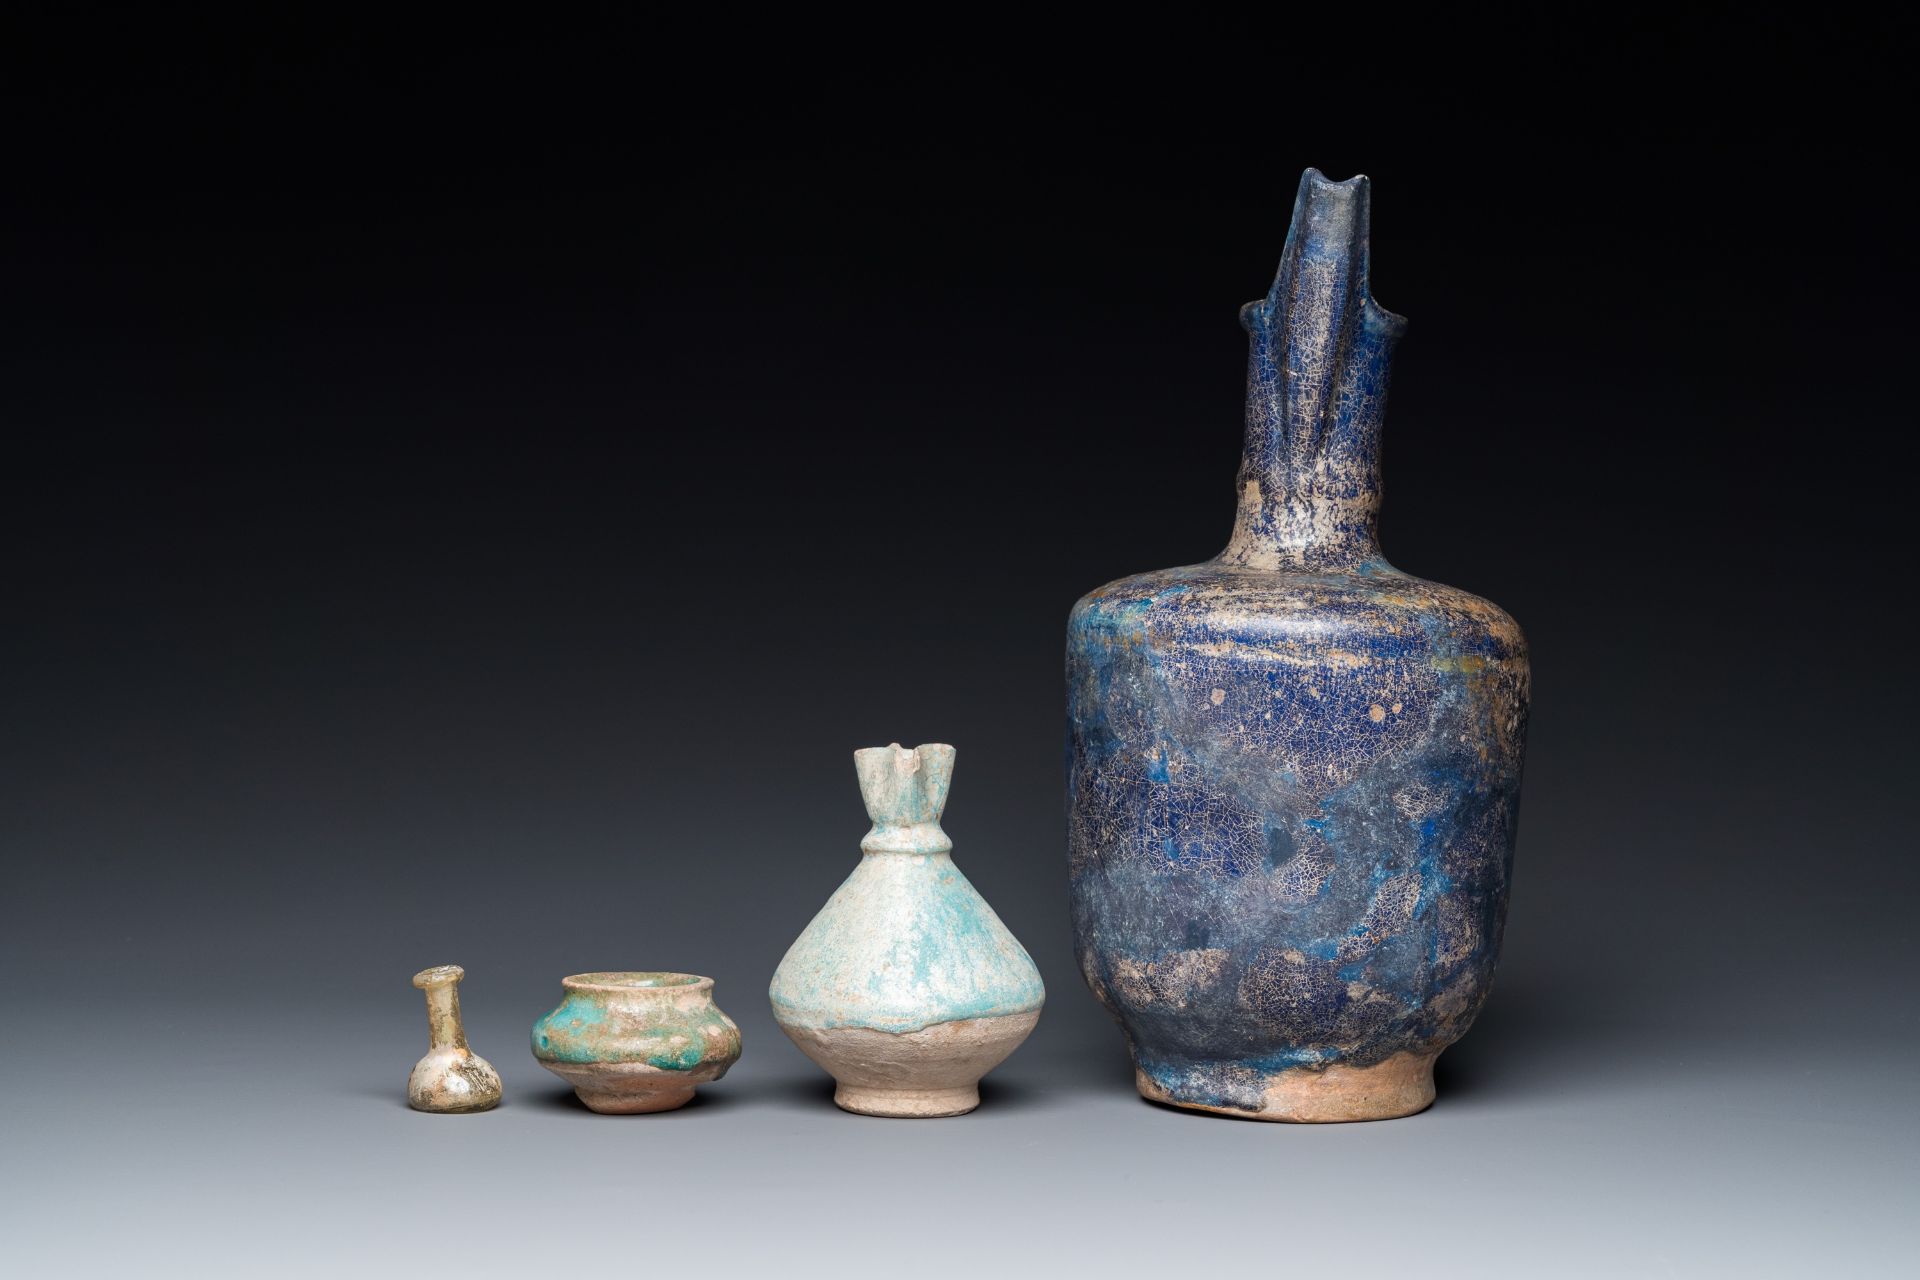 Three blue- and turquoise-glazed Islamic pottery wares and a glass bottle, Kashan and Raqqa, 12th C. - Image 5 of 7